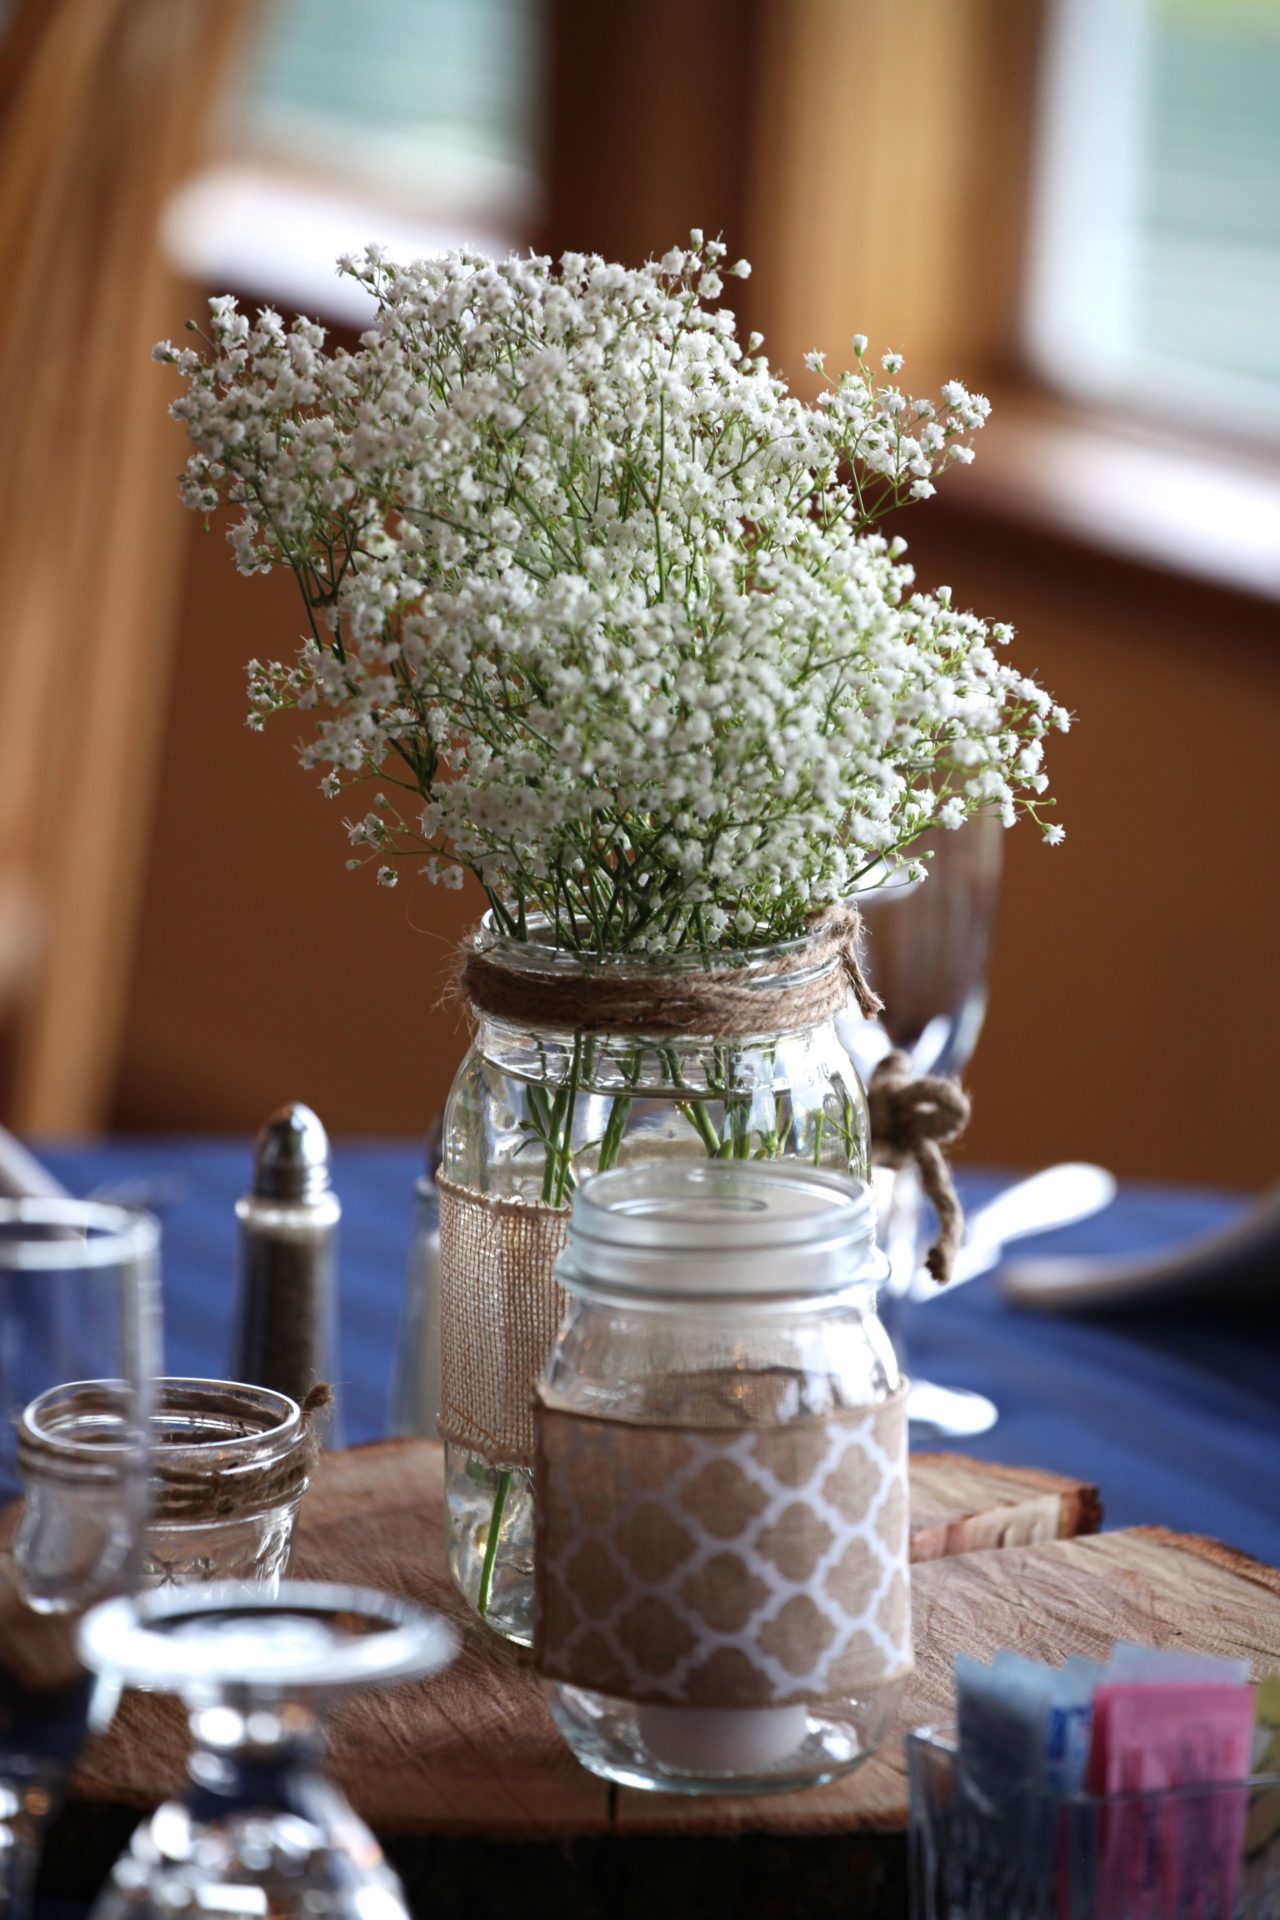 Simple rustic wedding centerpiece with glass jar and baby's breath flowers